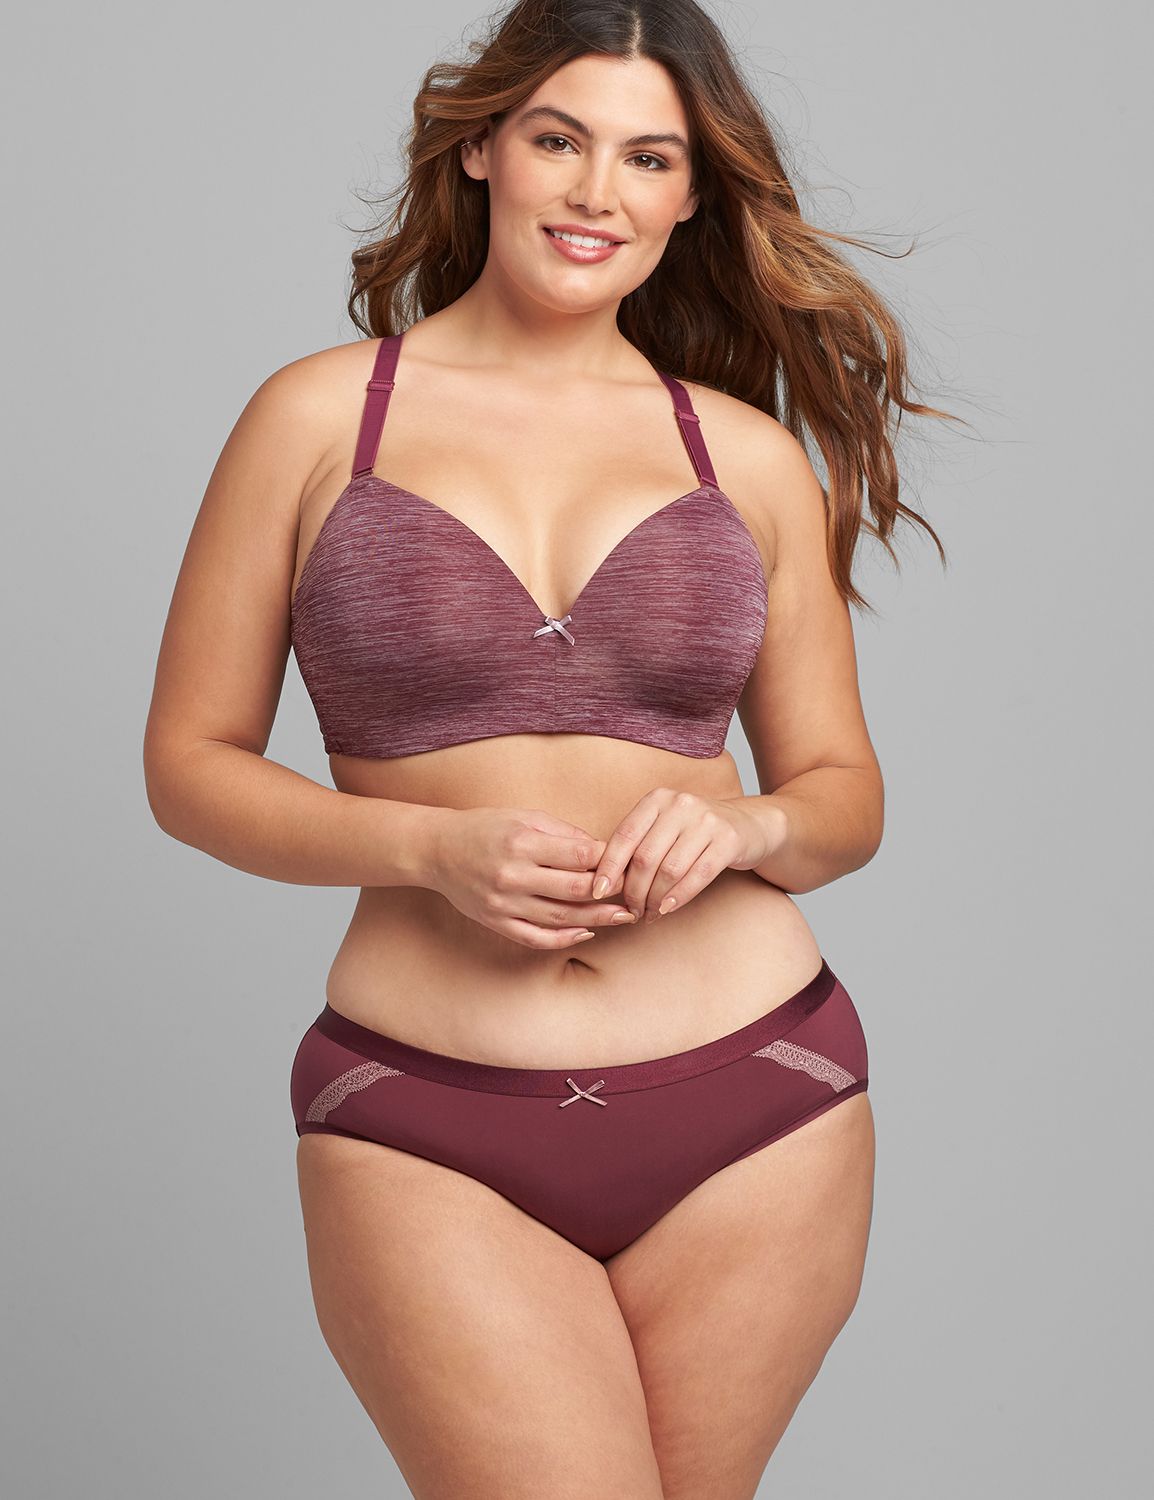 Cacique Simply Wire Free Uplift Plunge Bra Blue Size 48 E / DD - $30 (50%  Off Retail) New With Tags - From Alejandra